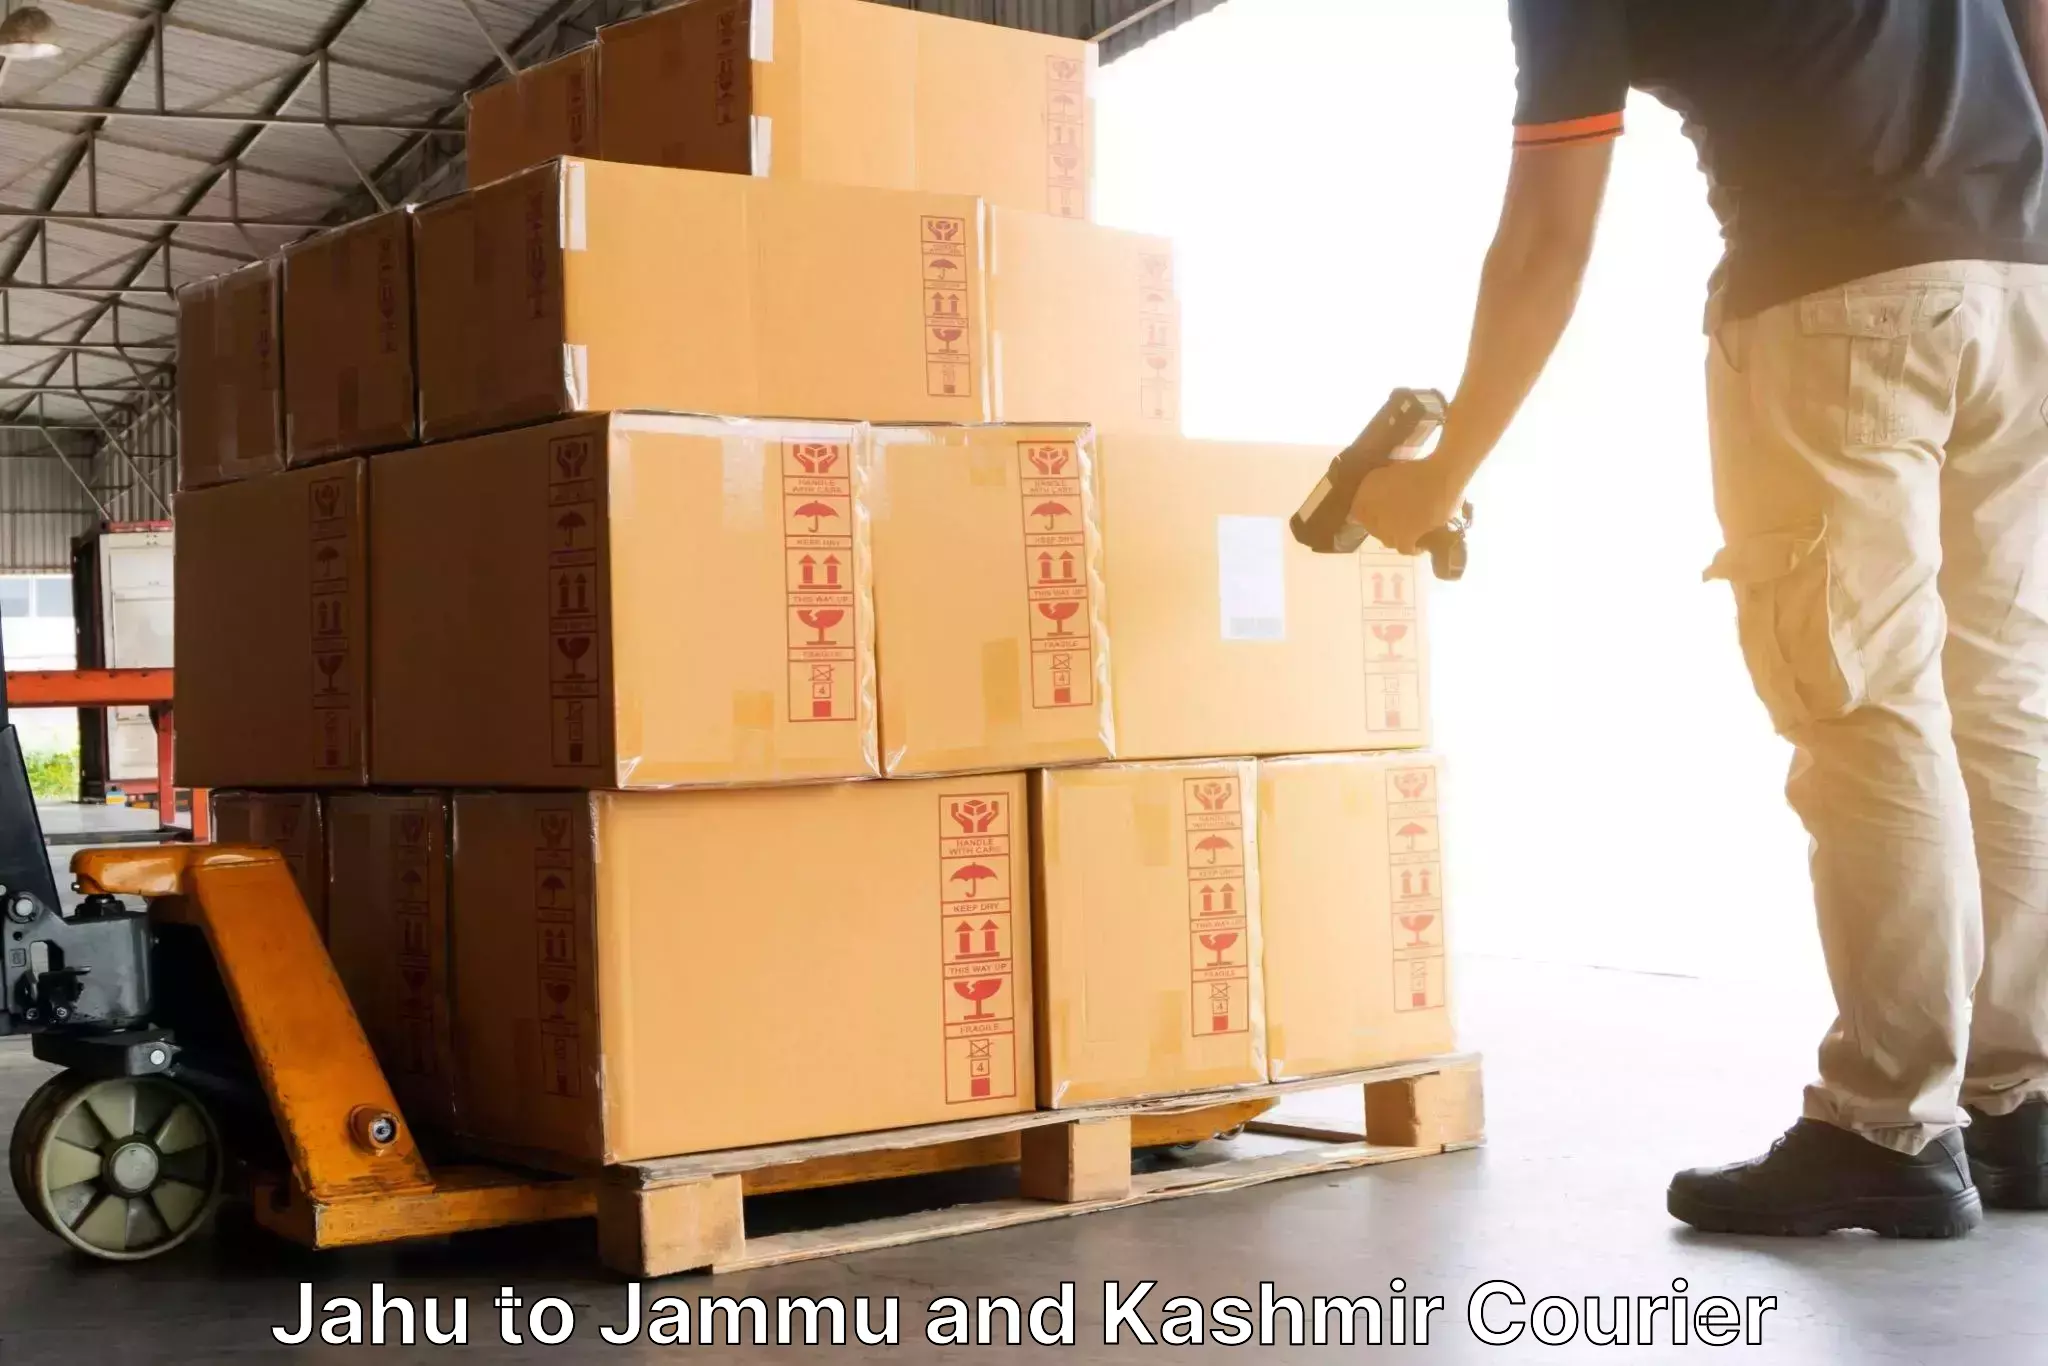 State-of-the-art courier technology Jahu to Udhampur